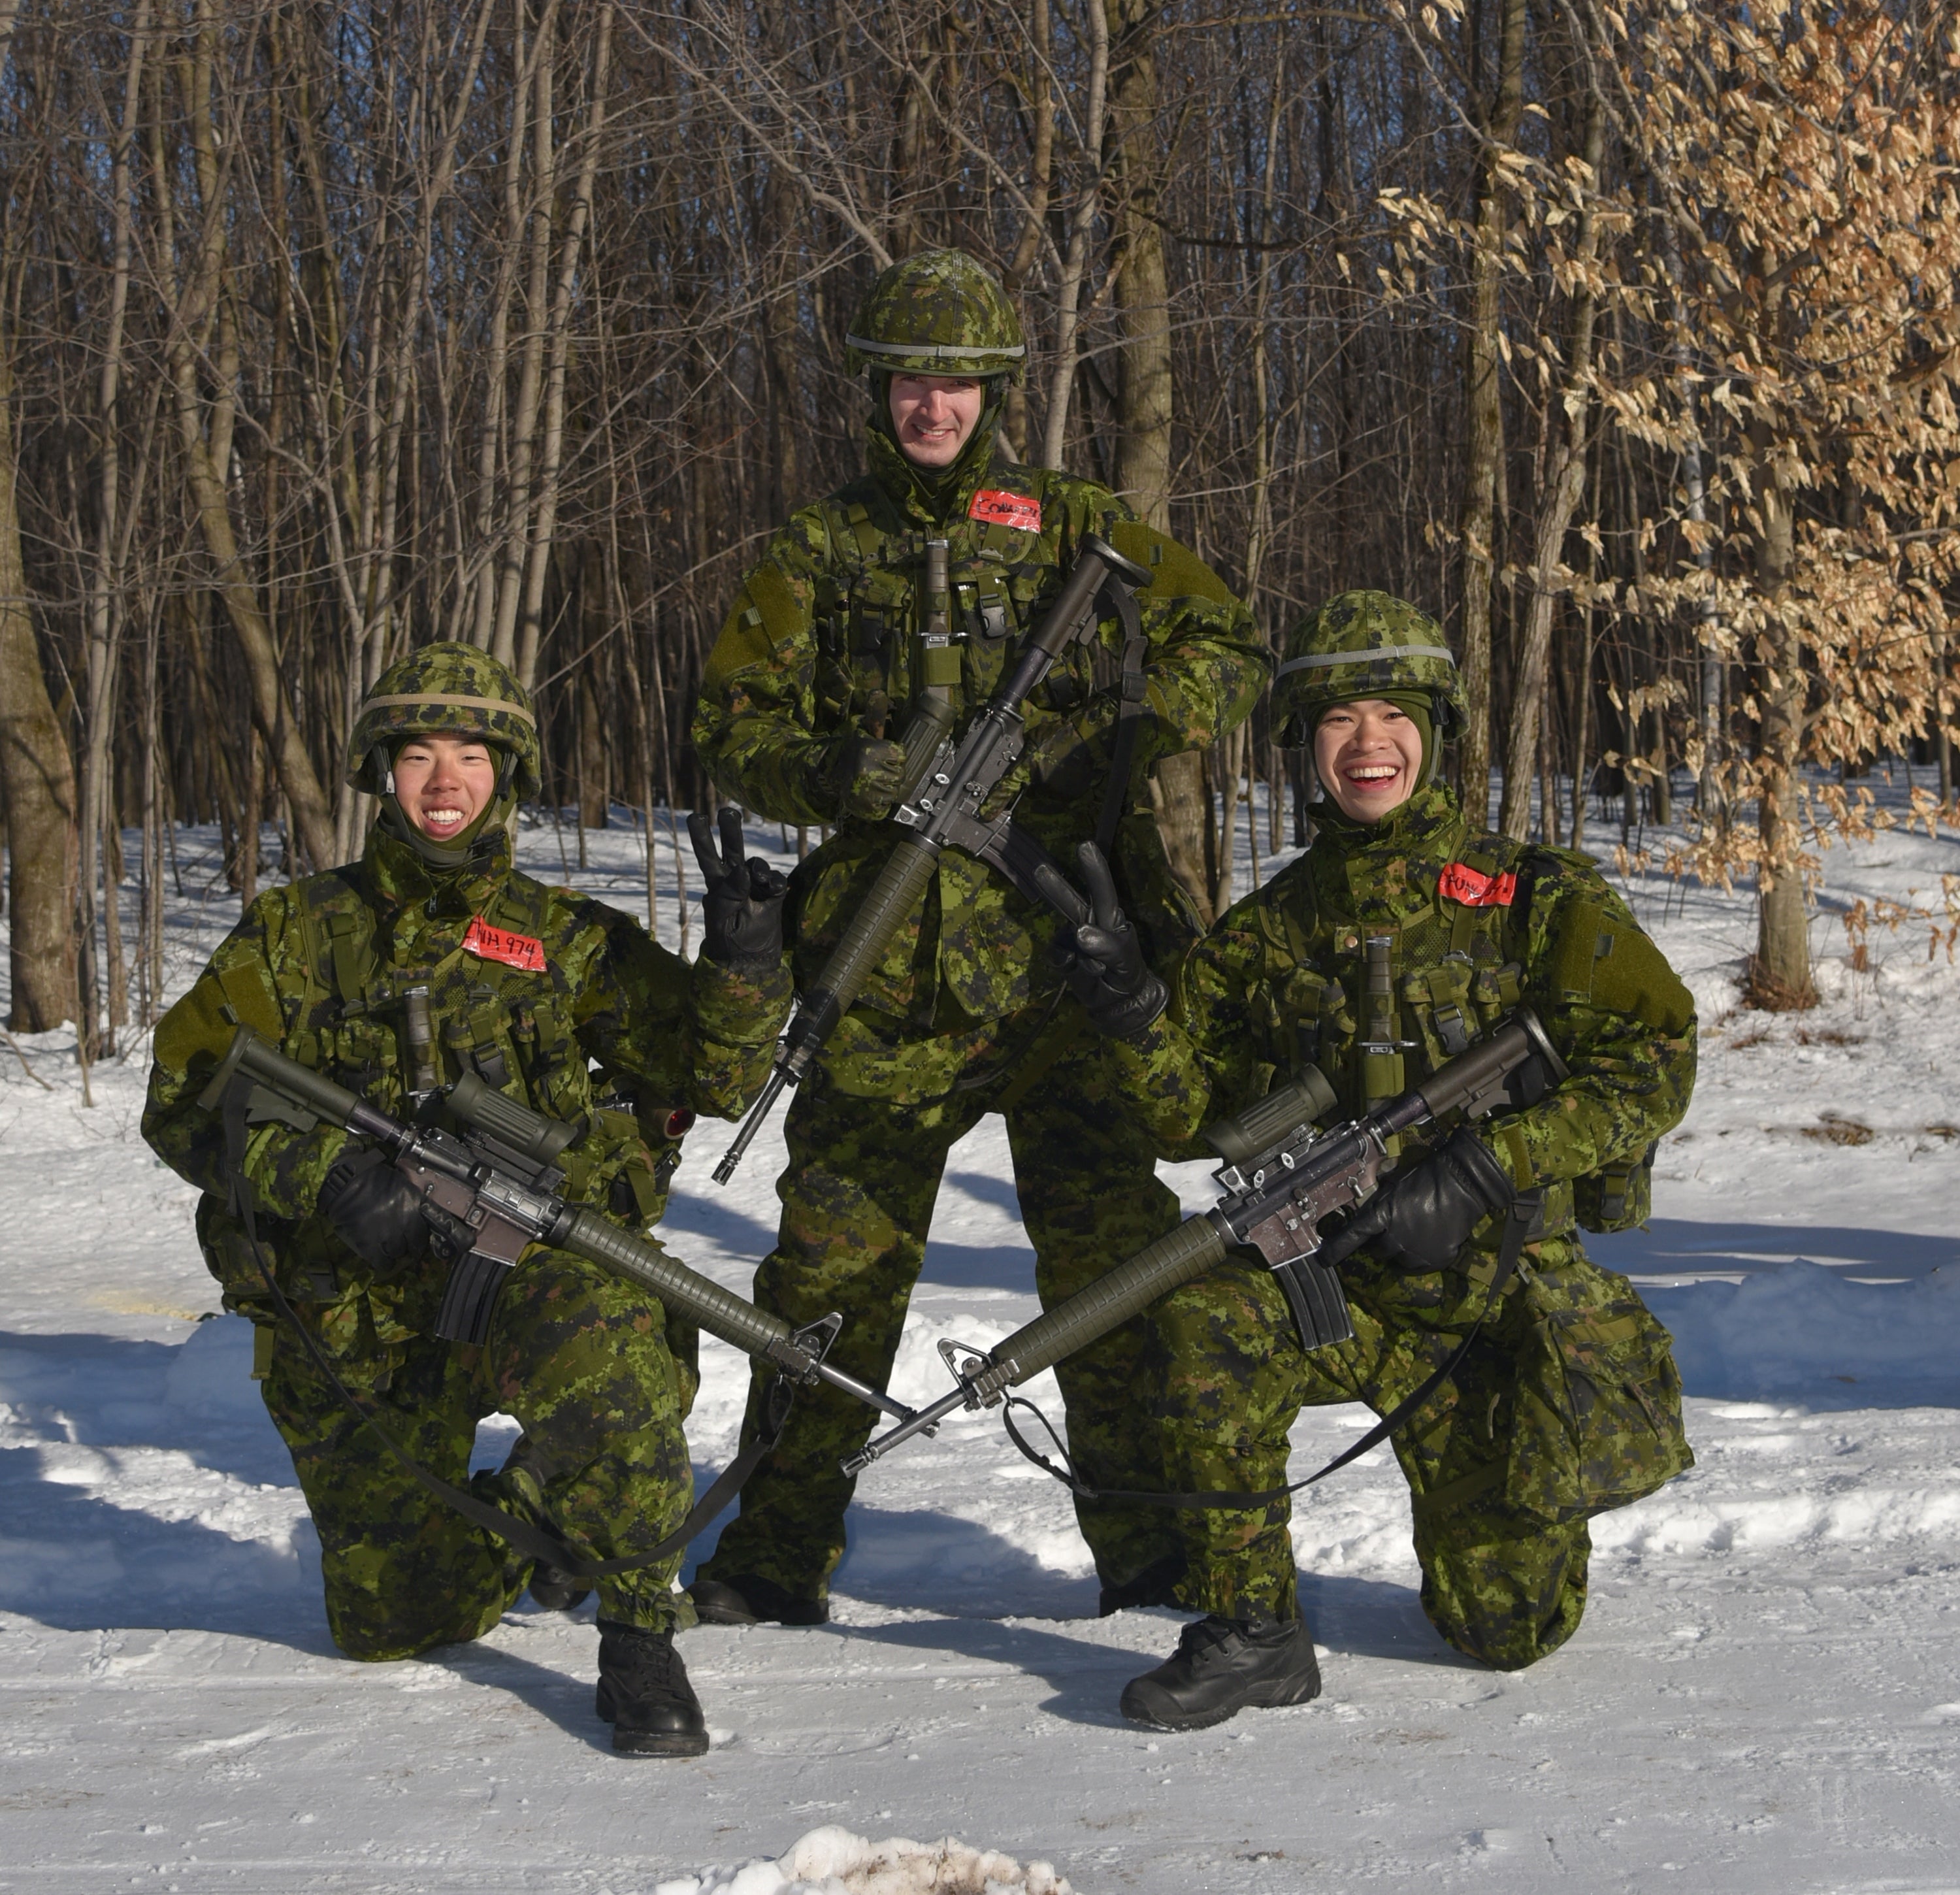 Sean and two comrades in the snow wearing military attire